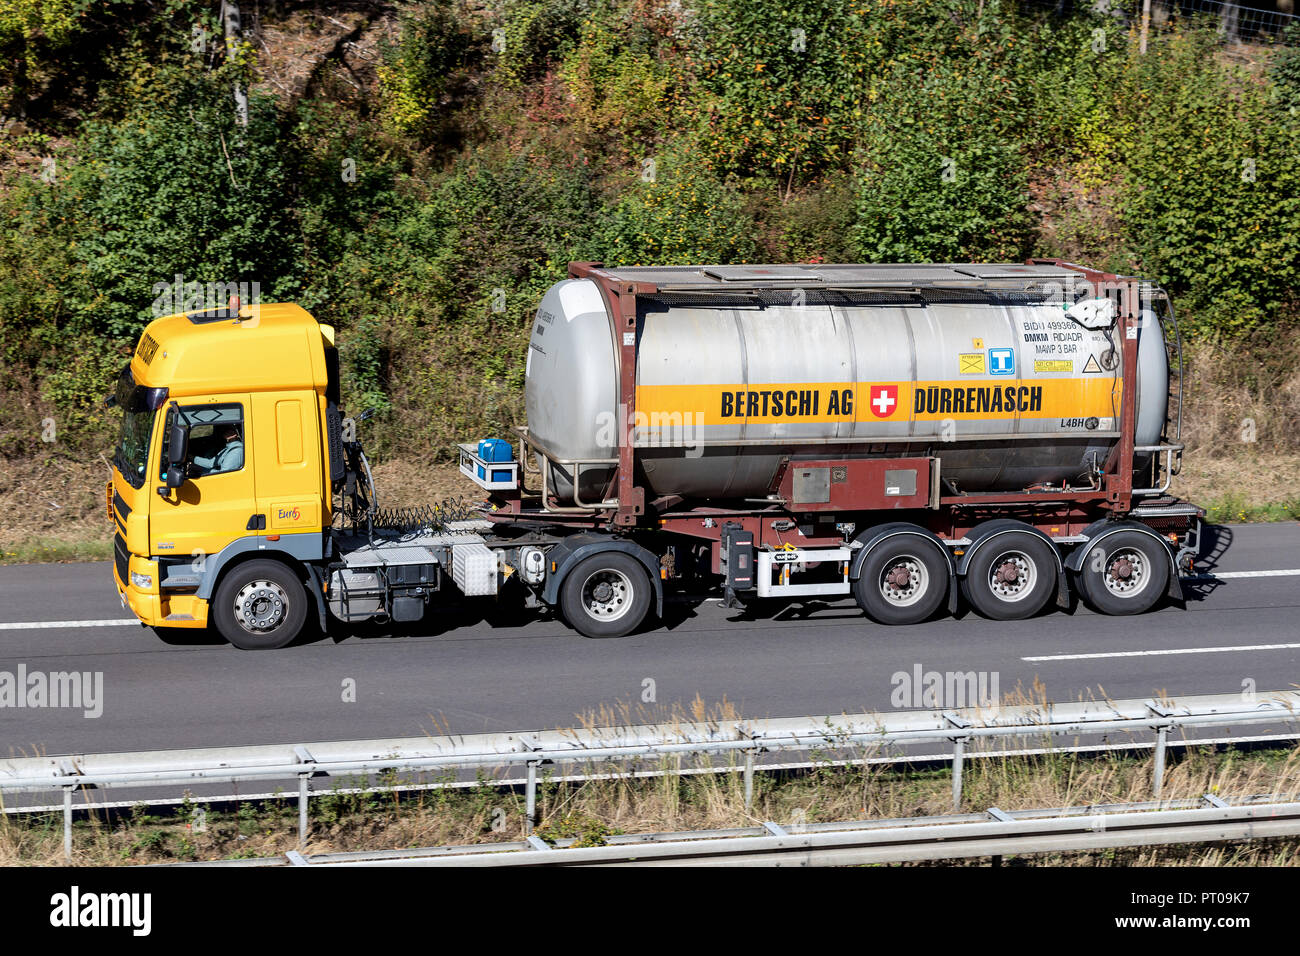 Bertschi truck on motorway. Bertschi AG is a Swiss transport company that provides logistics and transport for the chemical industry. Stock Photo